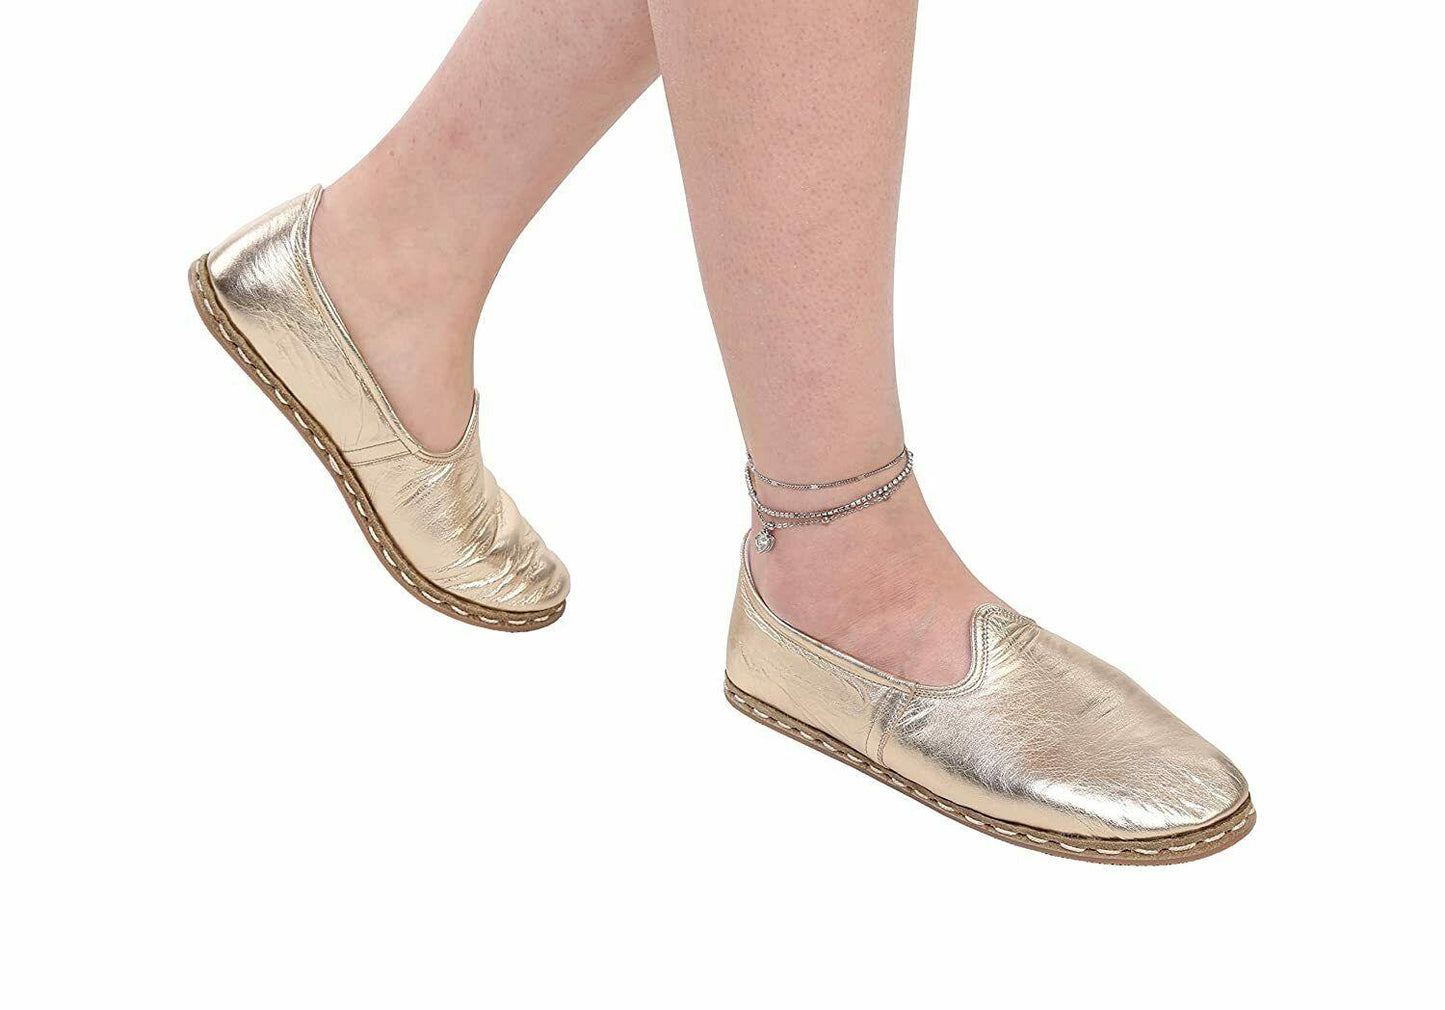 GIZZE Handmade GOLD Leather Slip-On loafers Shoes Size 8 - SVNYFancy